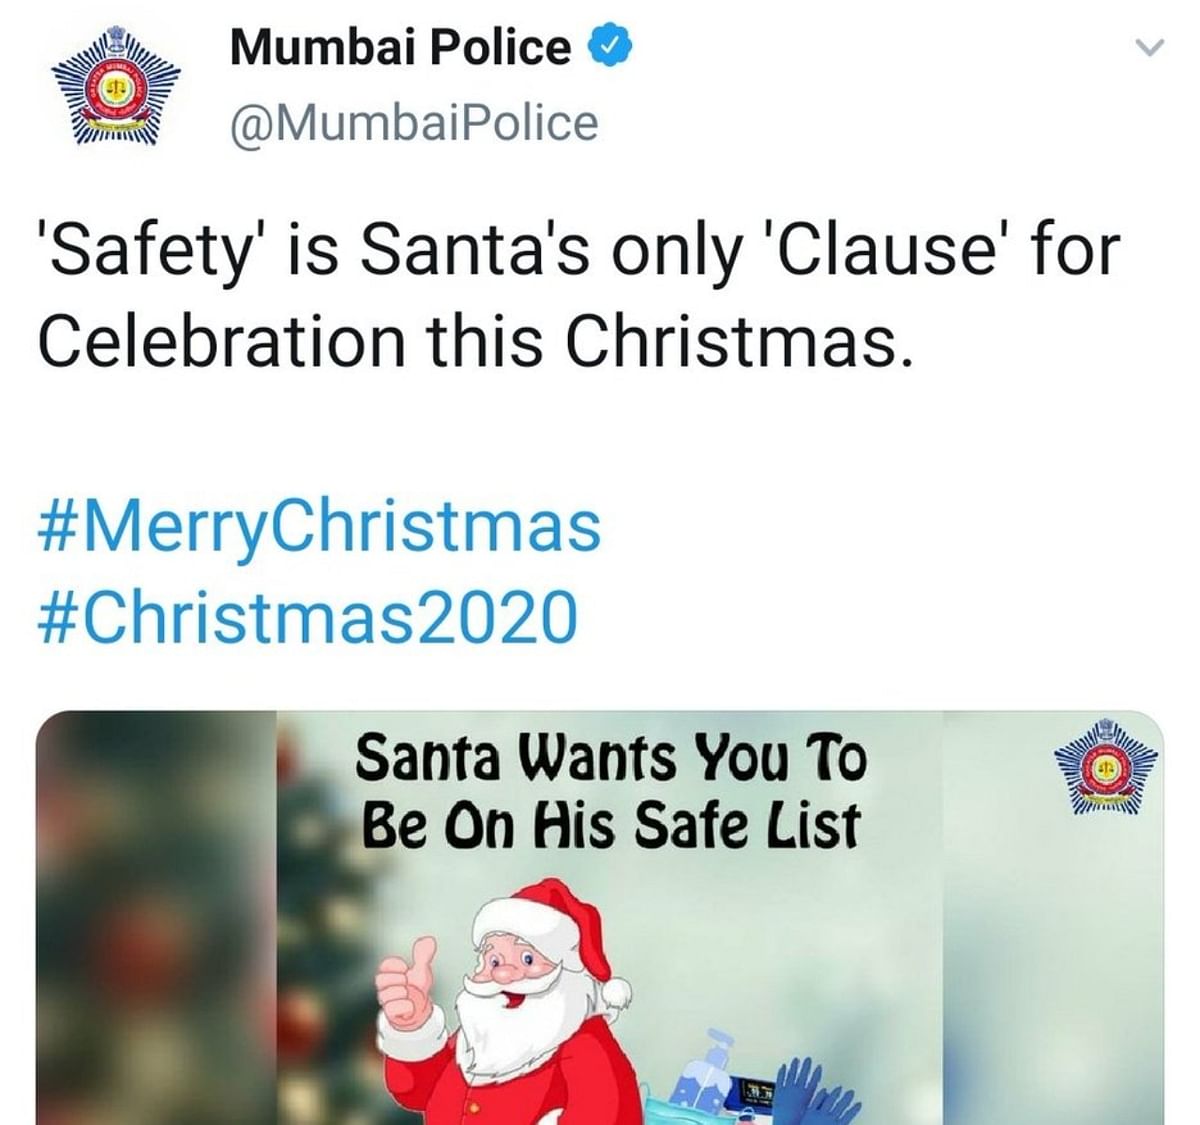 A Santa 'Clause' on Christmas? Mumbai Police's pun game at its best.